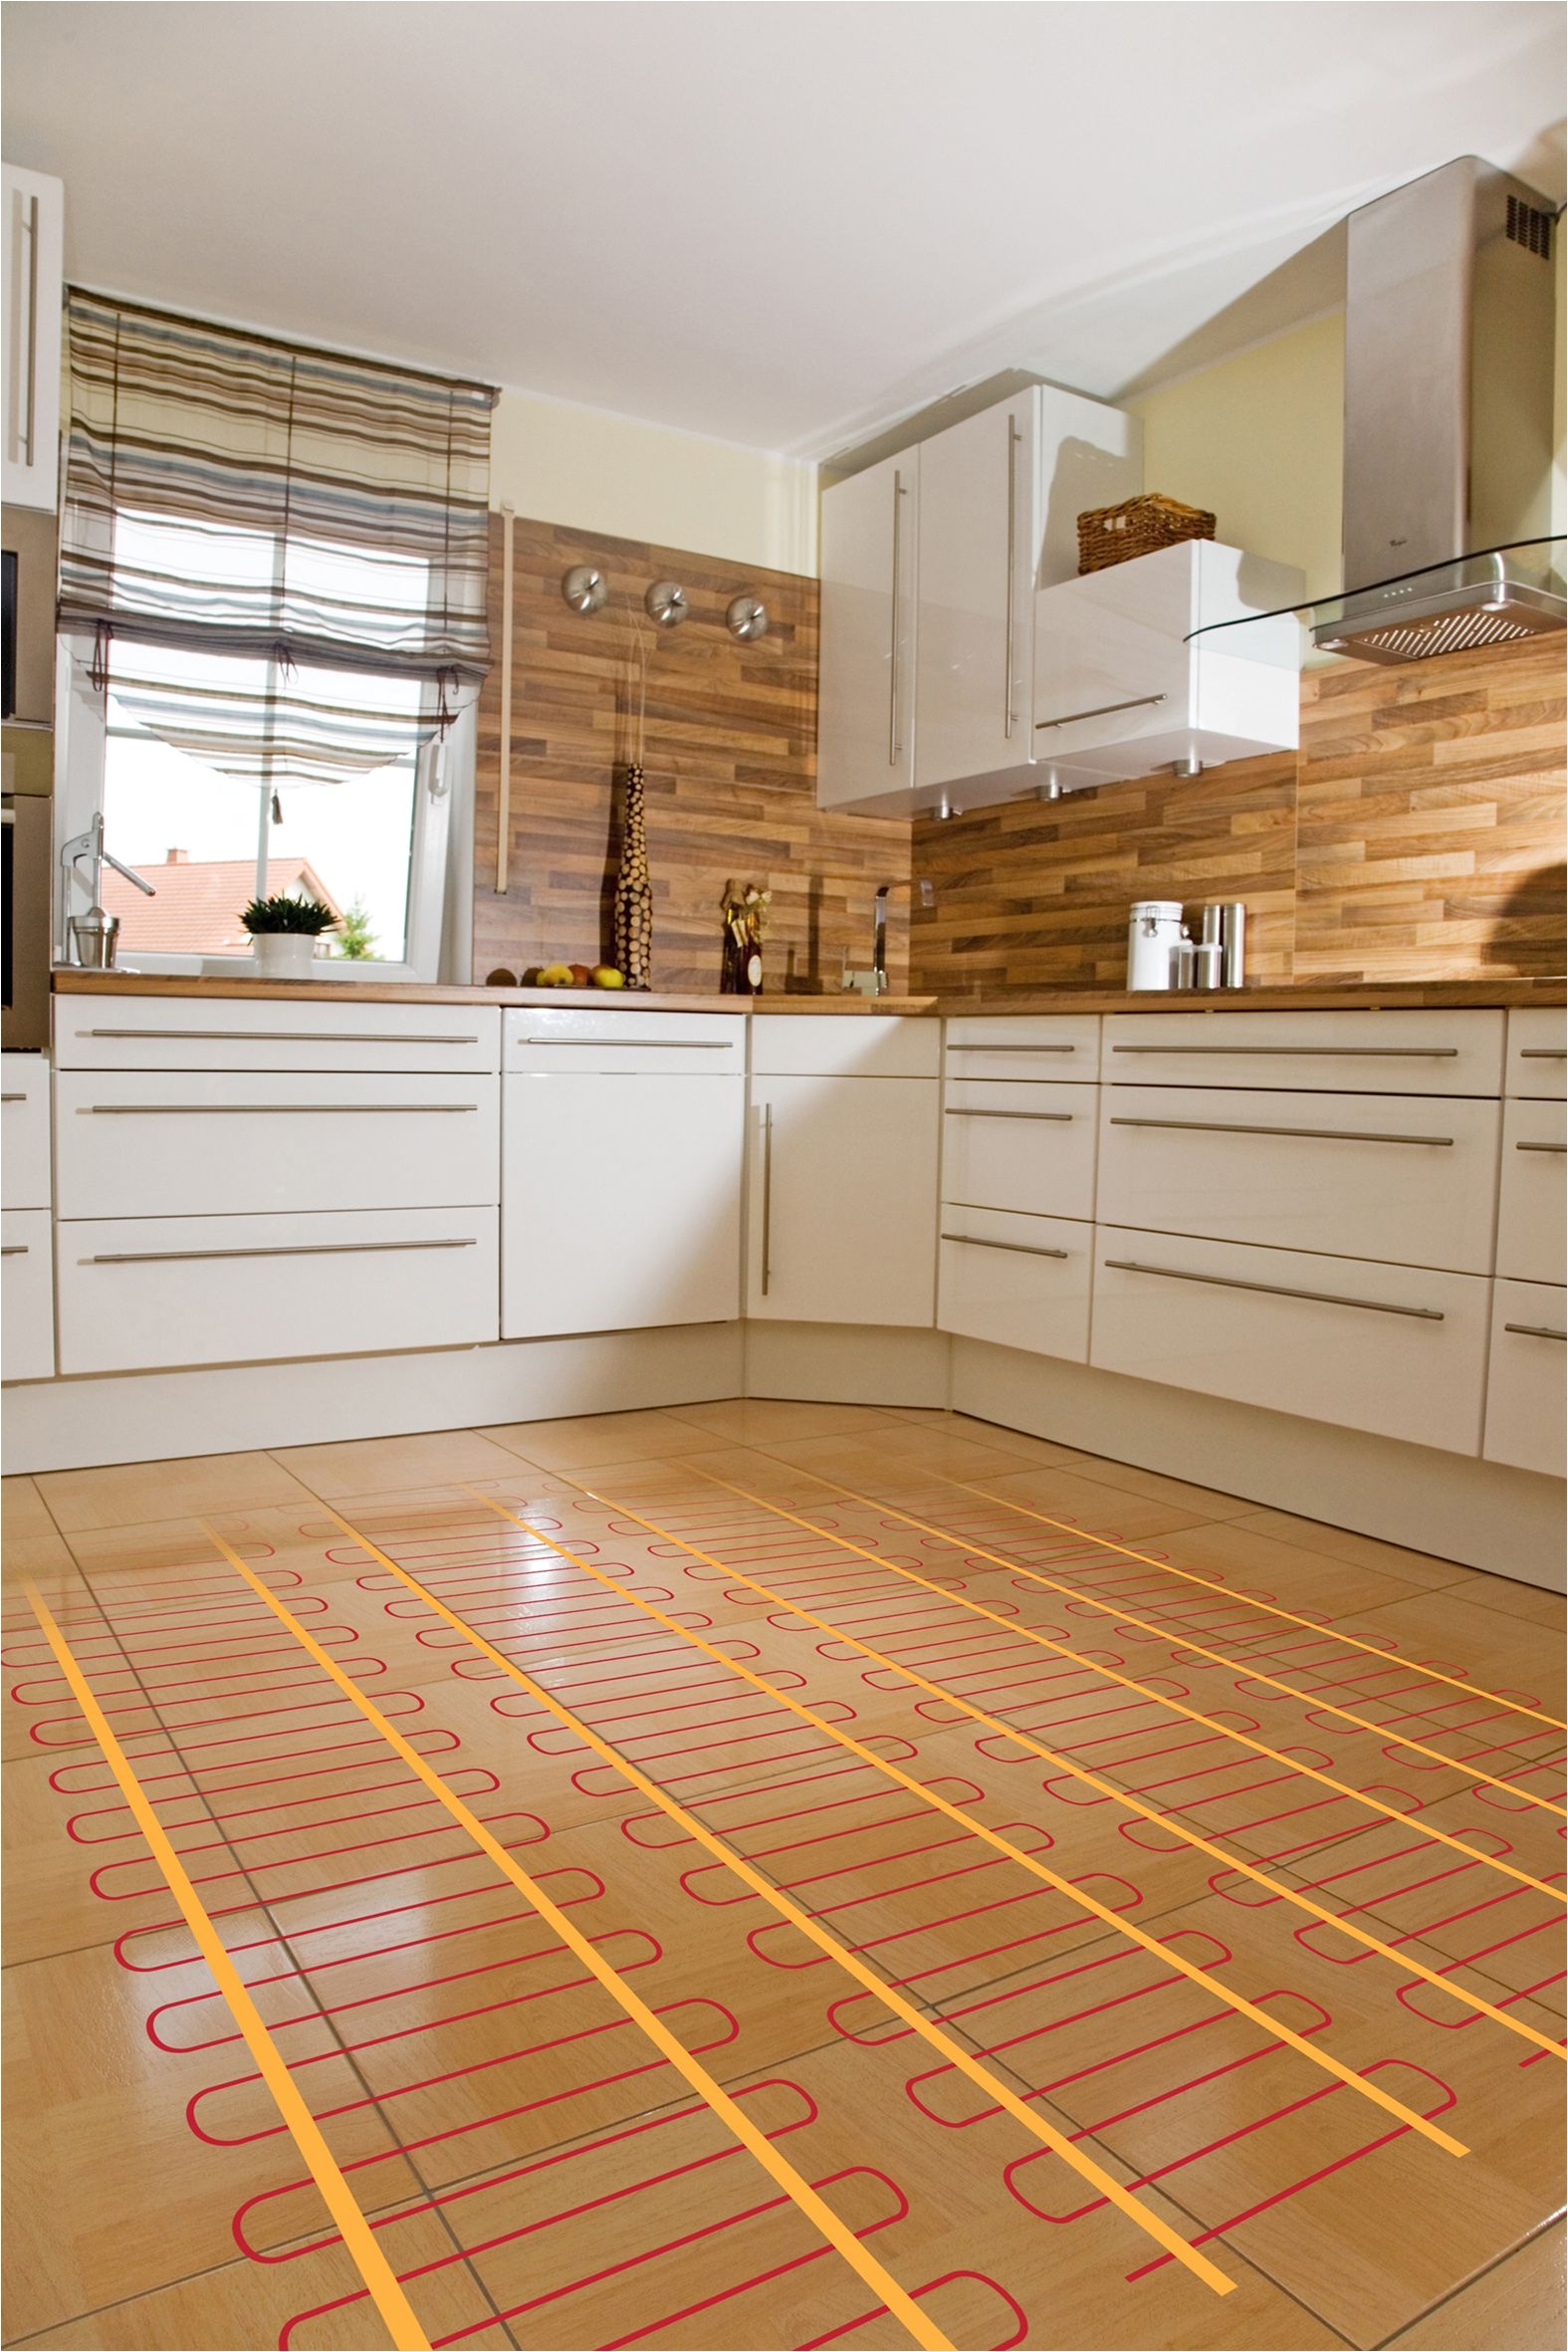 did you know electric tankless water heaters are great for radiant floor heating